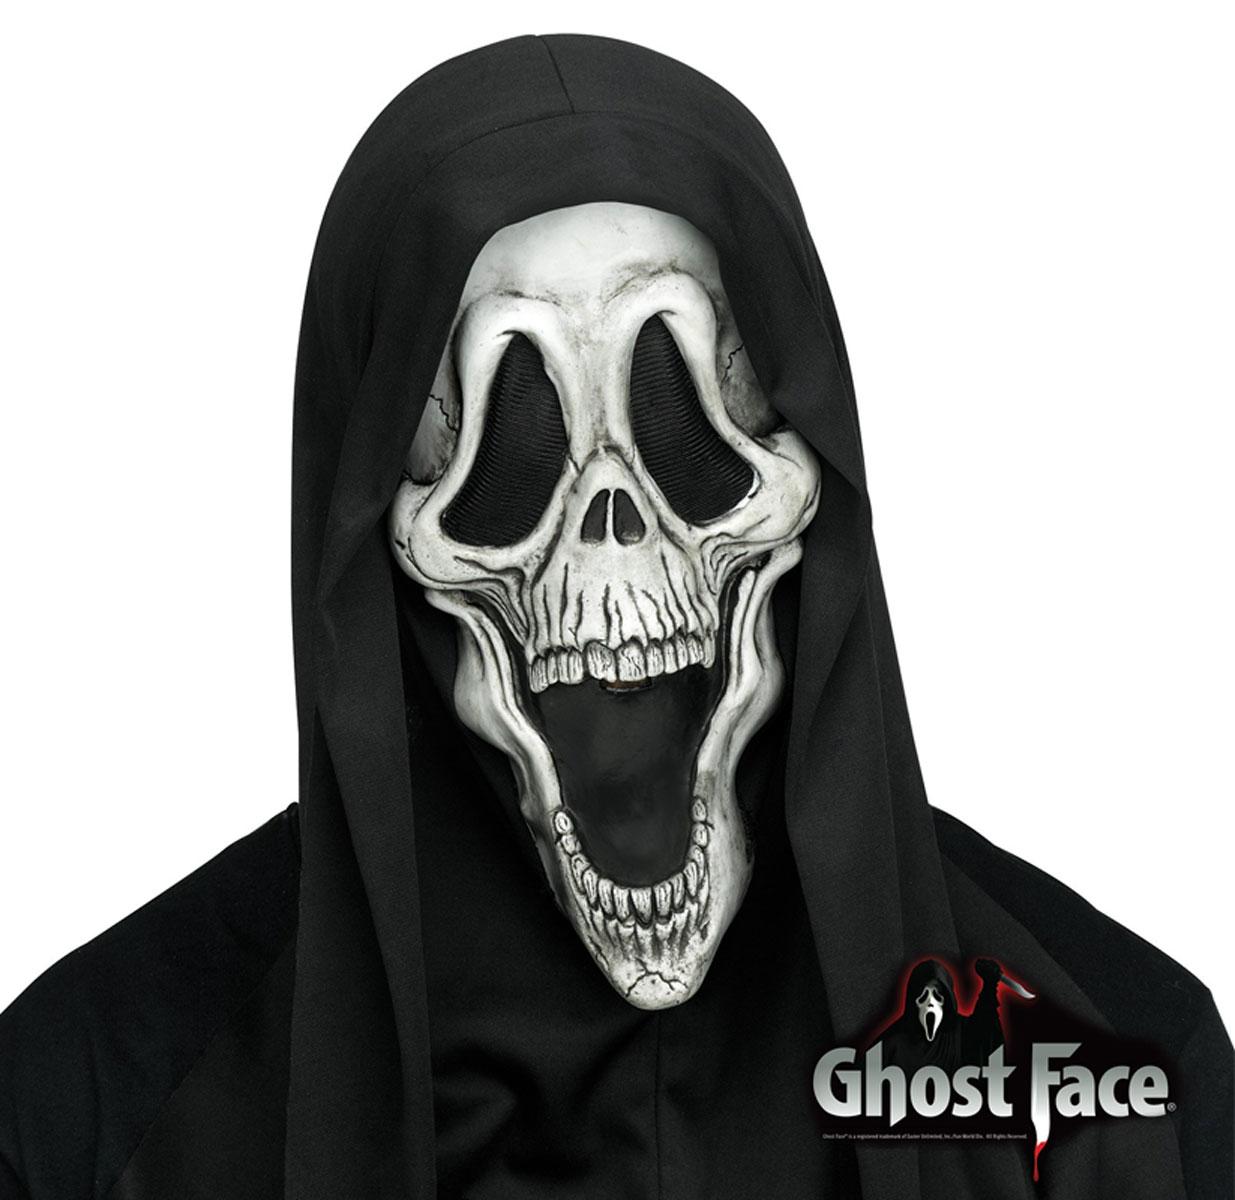 Deluxe Skeleton Ghost Face Mask fully licensed by Fun World 93333 available here at Karnival Costumes online party shop